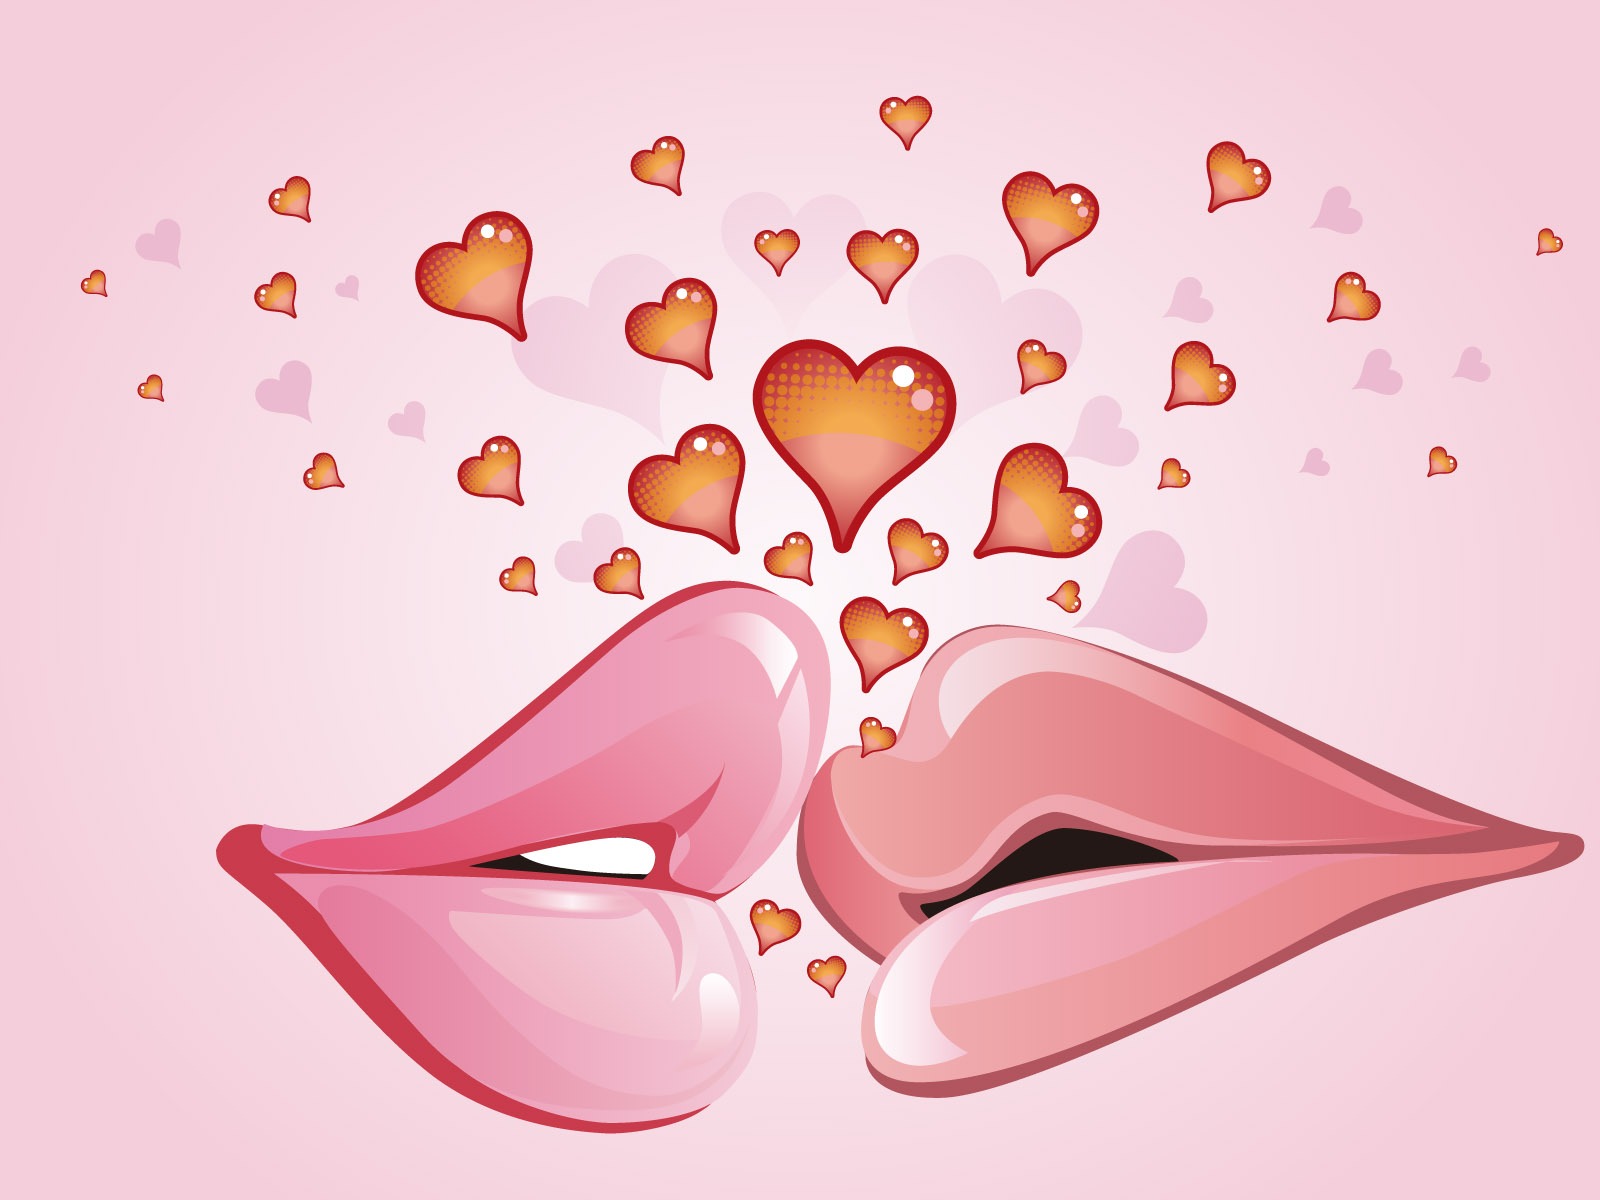 Valentine's Day Love Theme Wallpapers #22 - 1600x1200